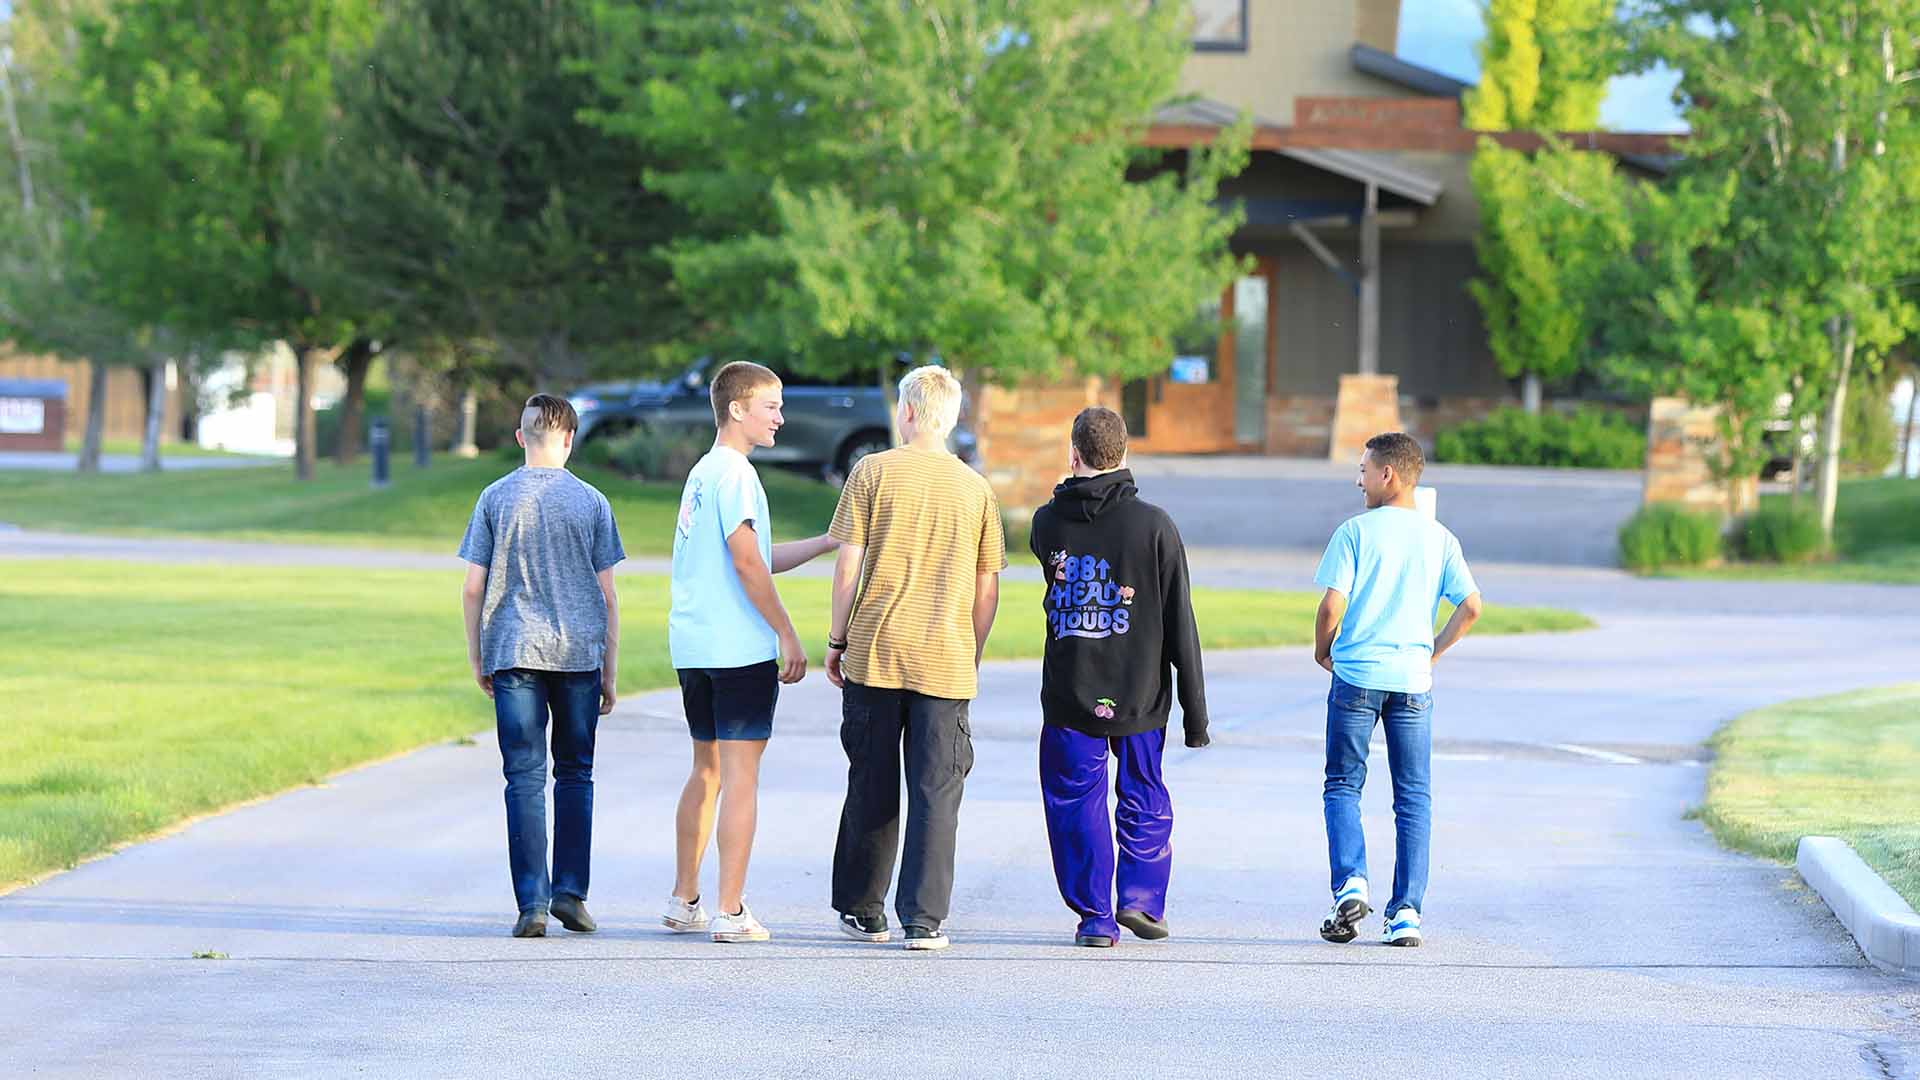 Boys walking in a group on campus